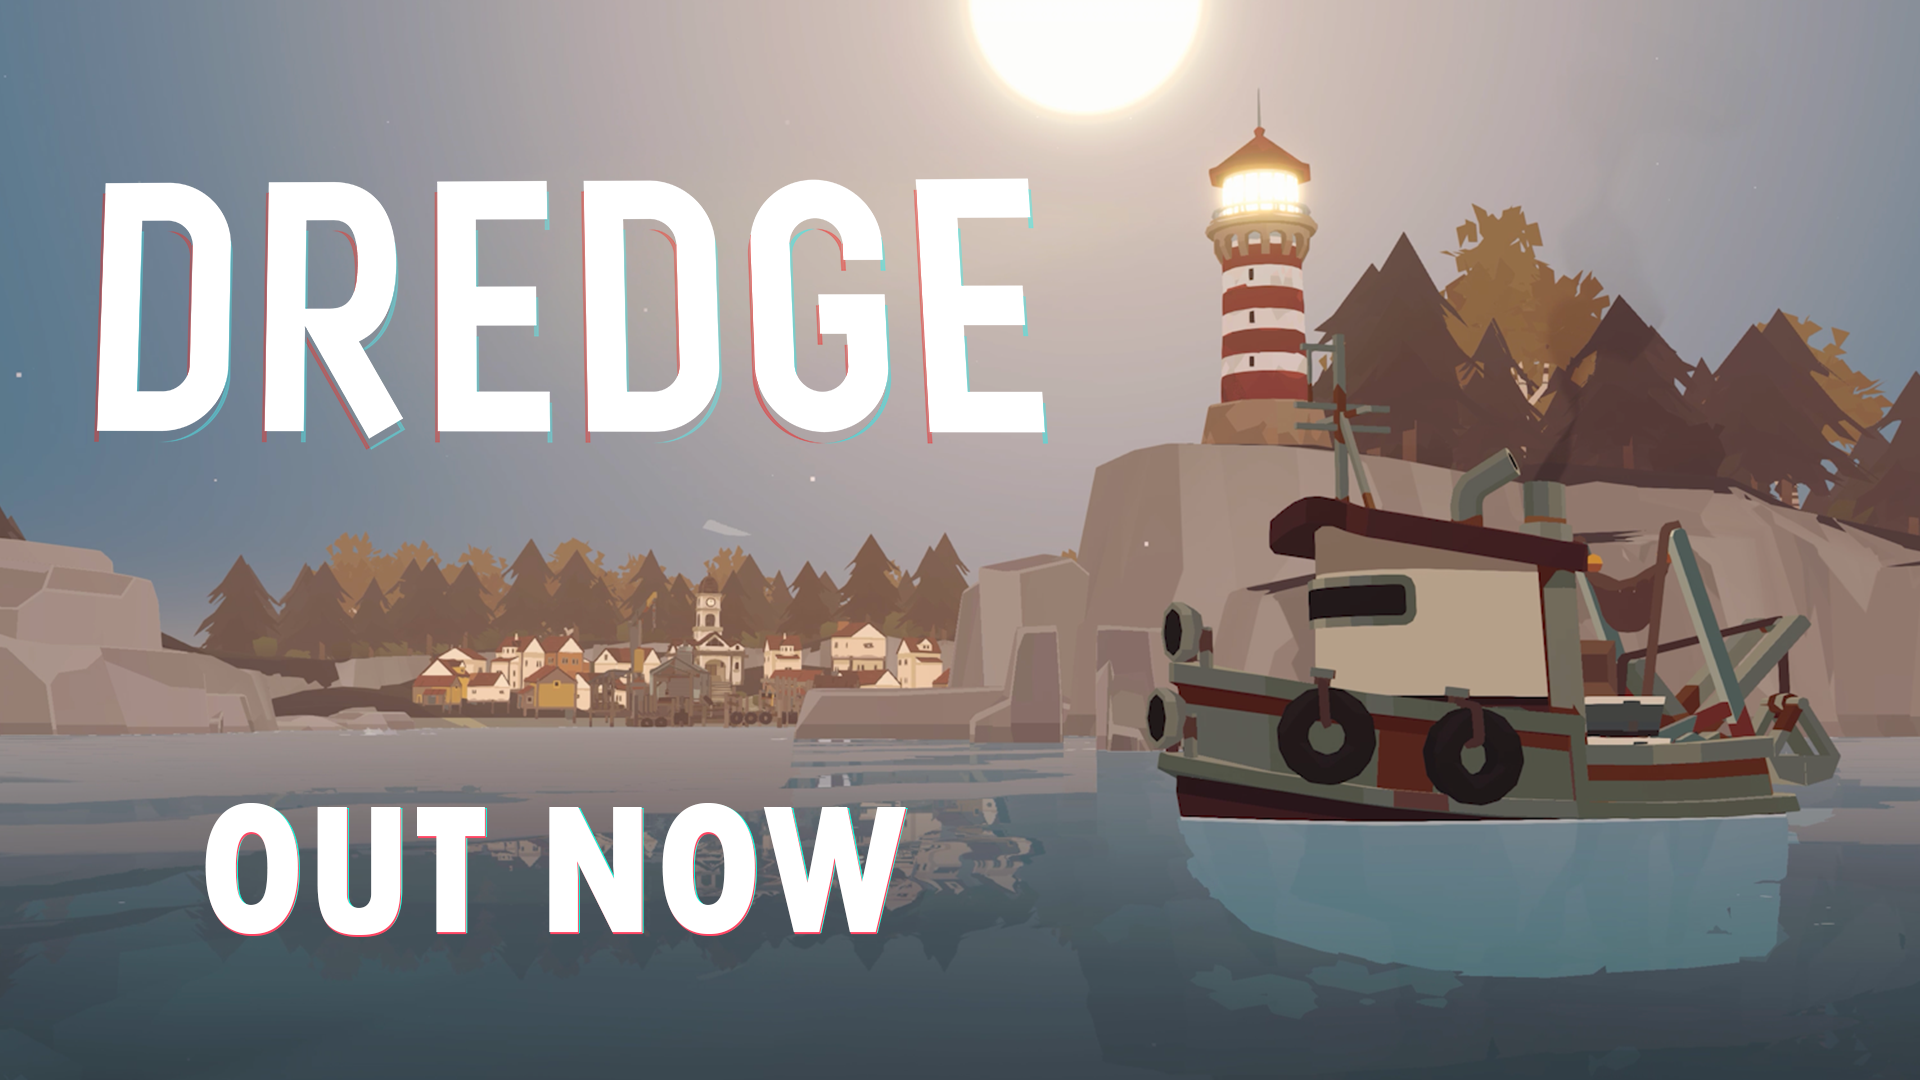 Sinister fishing game DREDGE is Out Now on PC and consoles! - Team17  Digital LTD - The Spirit Of Independent Games